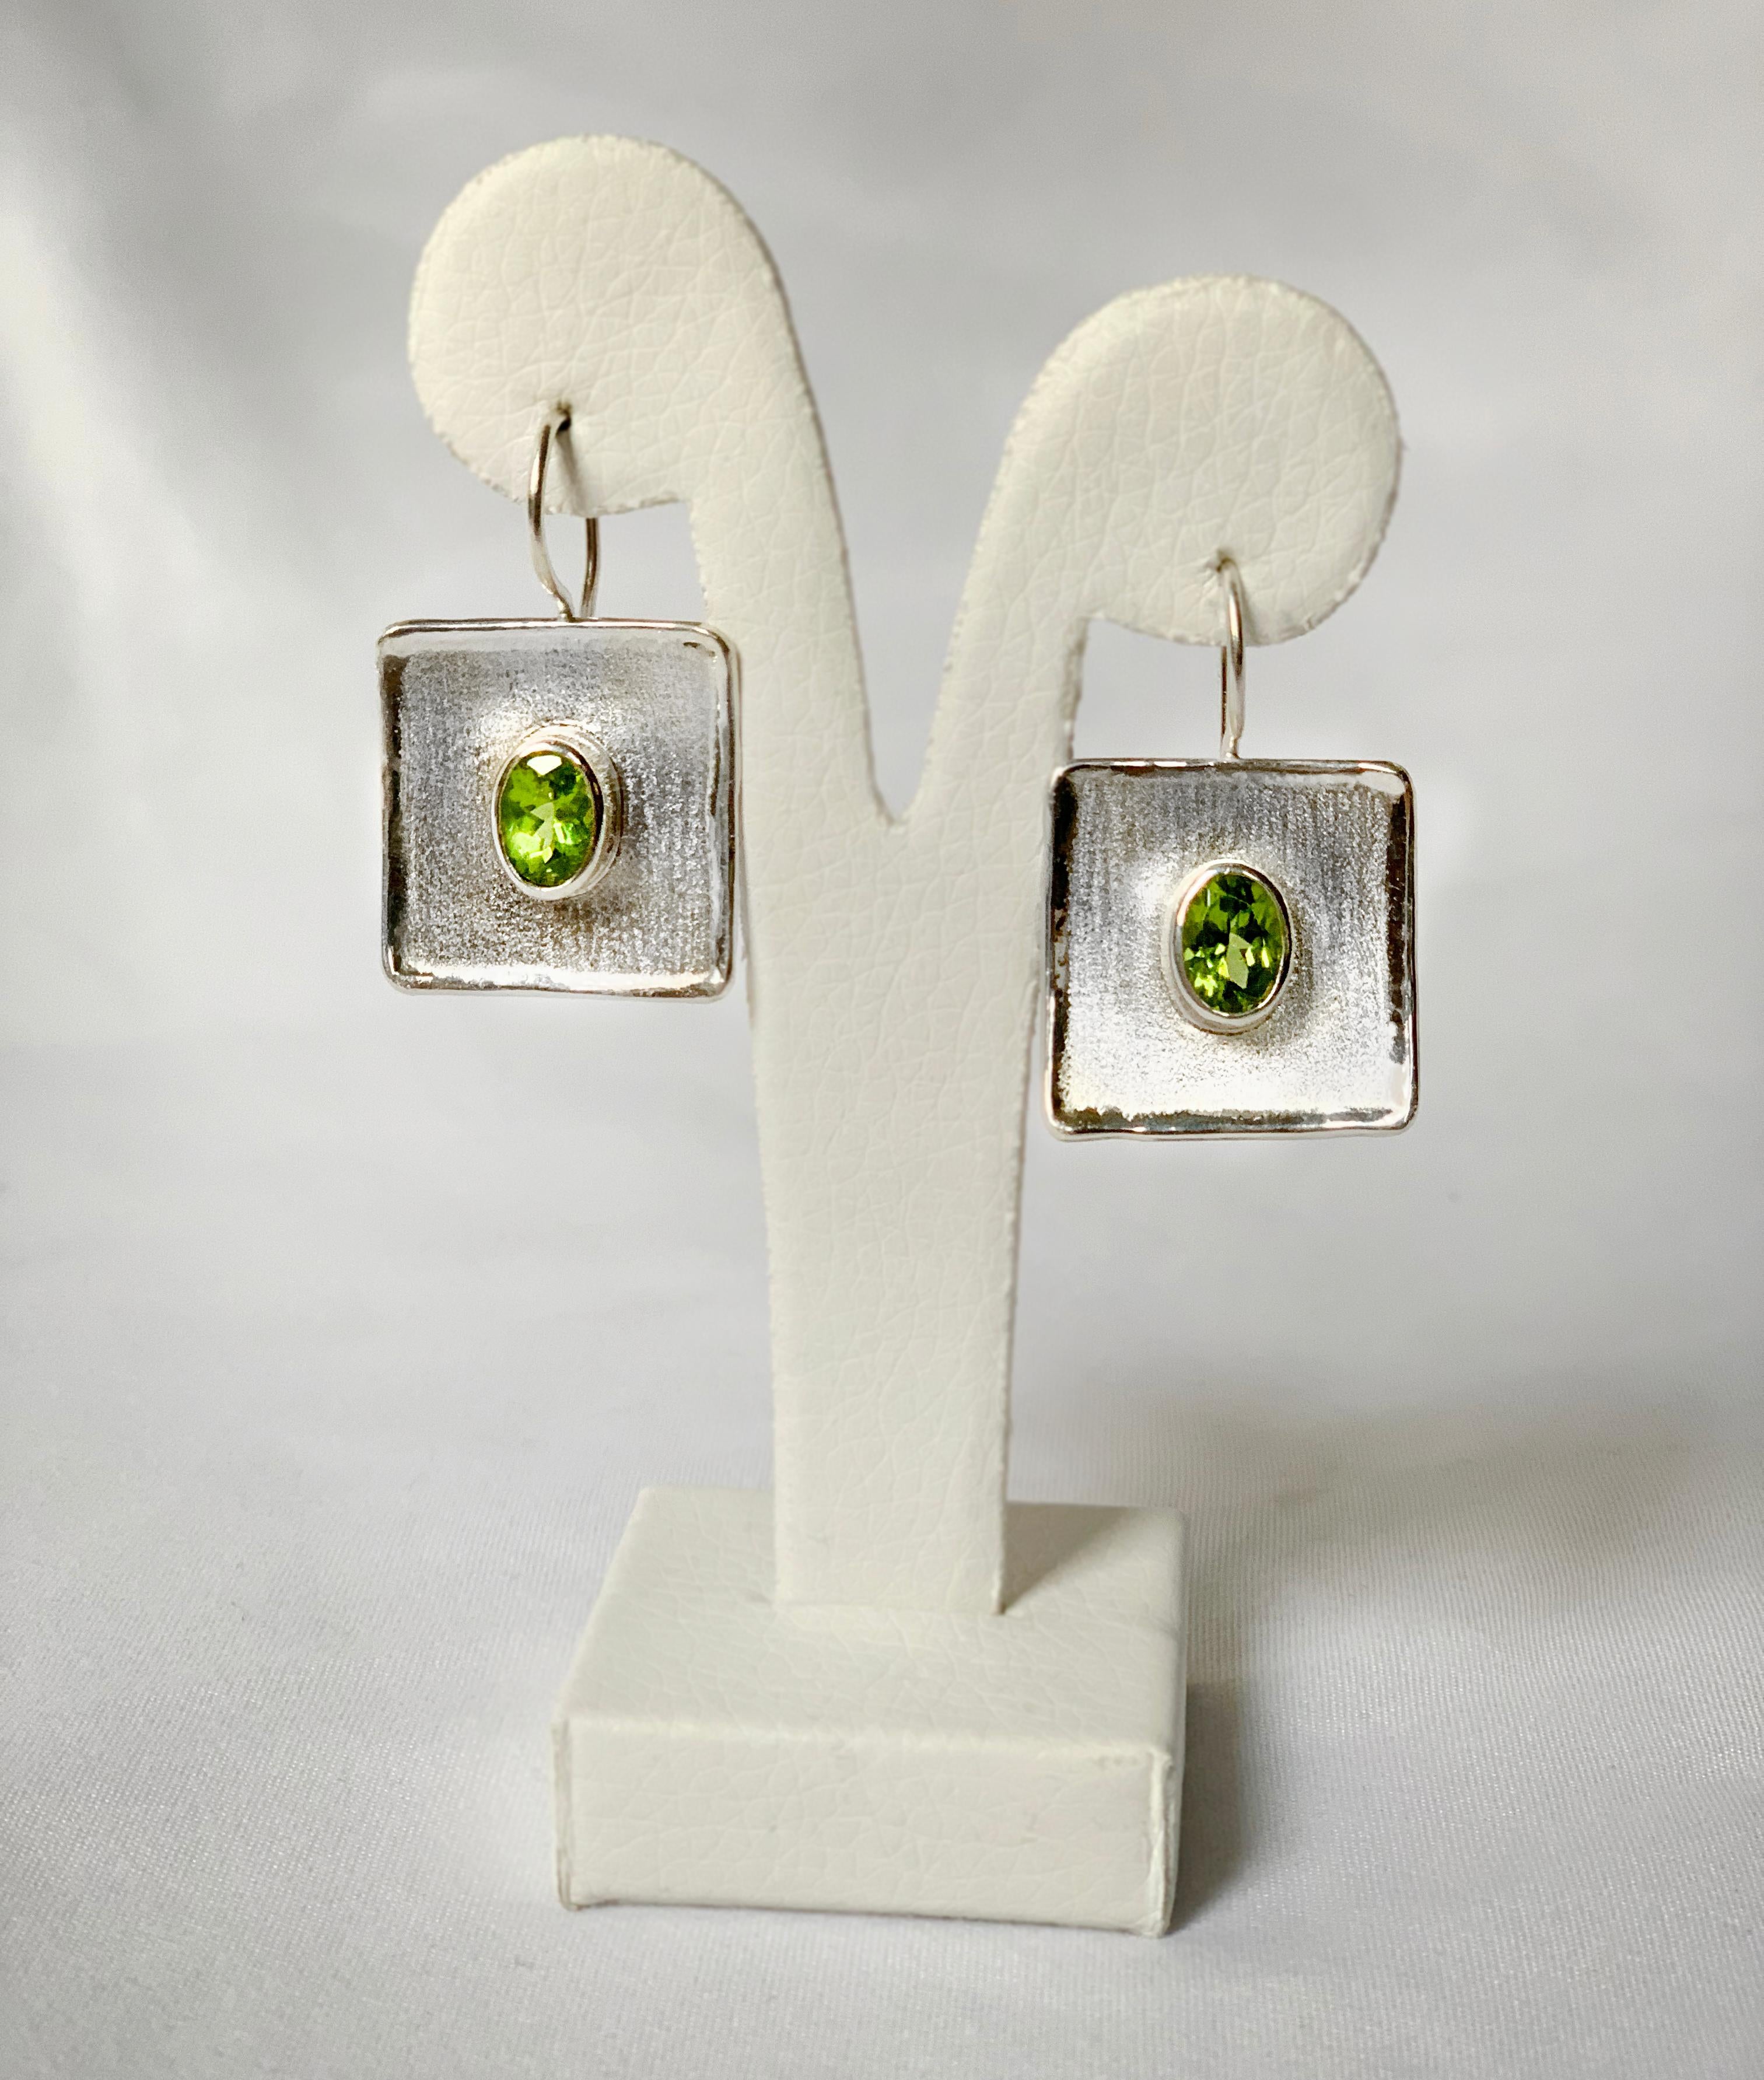 These are Yianni Creations fine silver pendant earrings handcrafted for Ammos Collection in Greece. Each of these artisan earrings features a 1.35 Carat oval cut Peridot. The unique look is created by using ancient techniques of silversmith work -